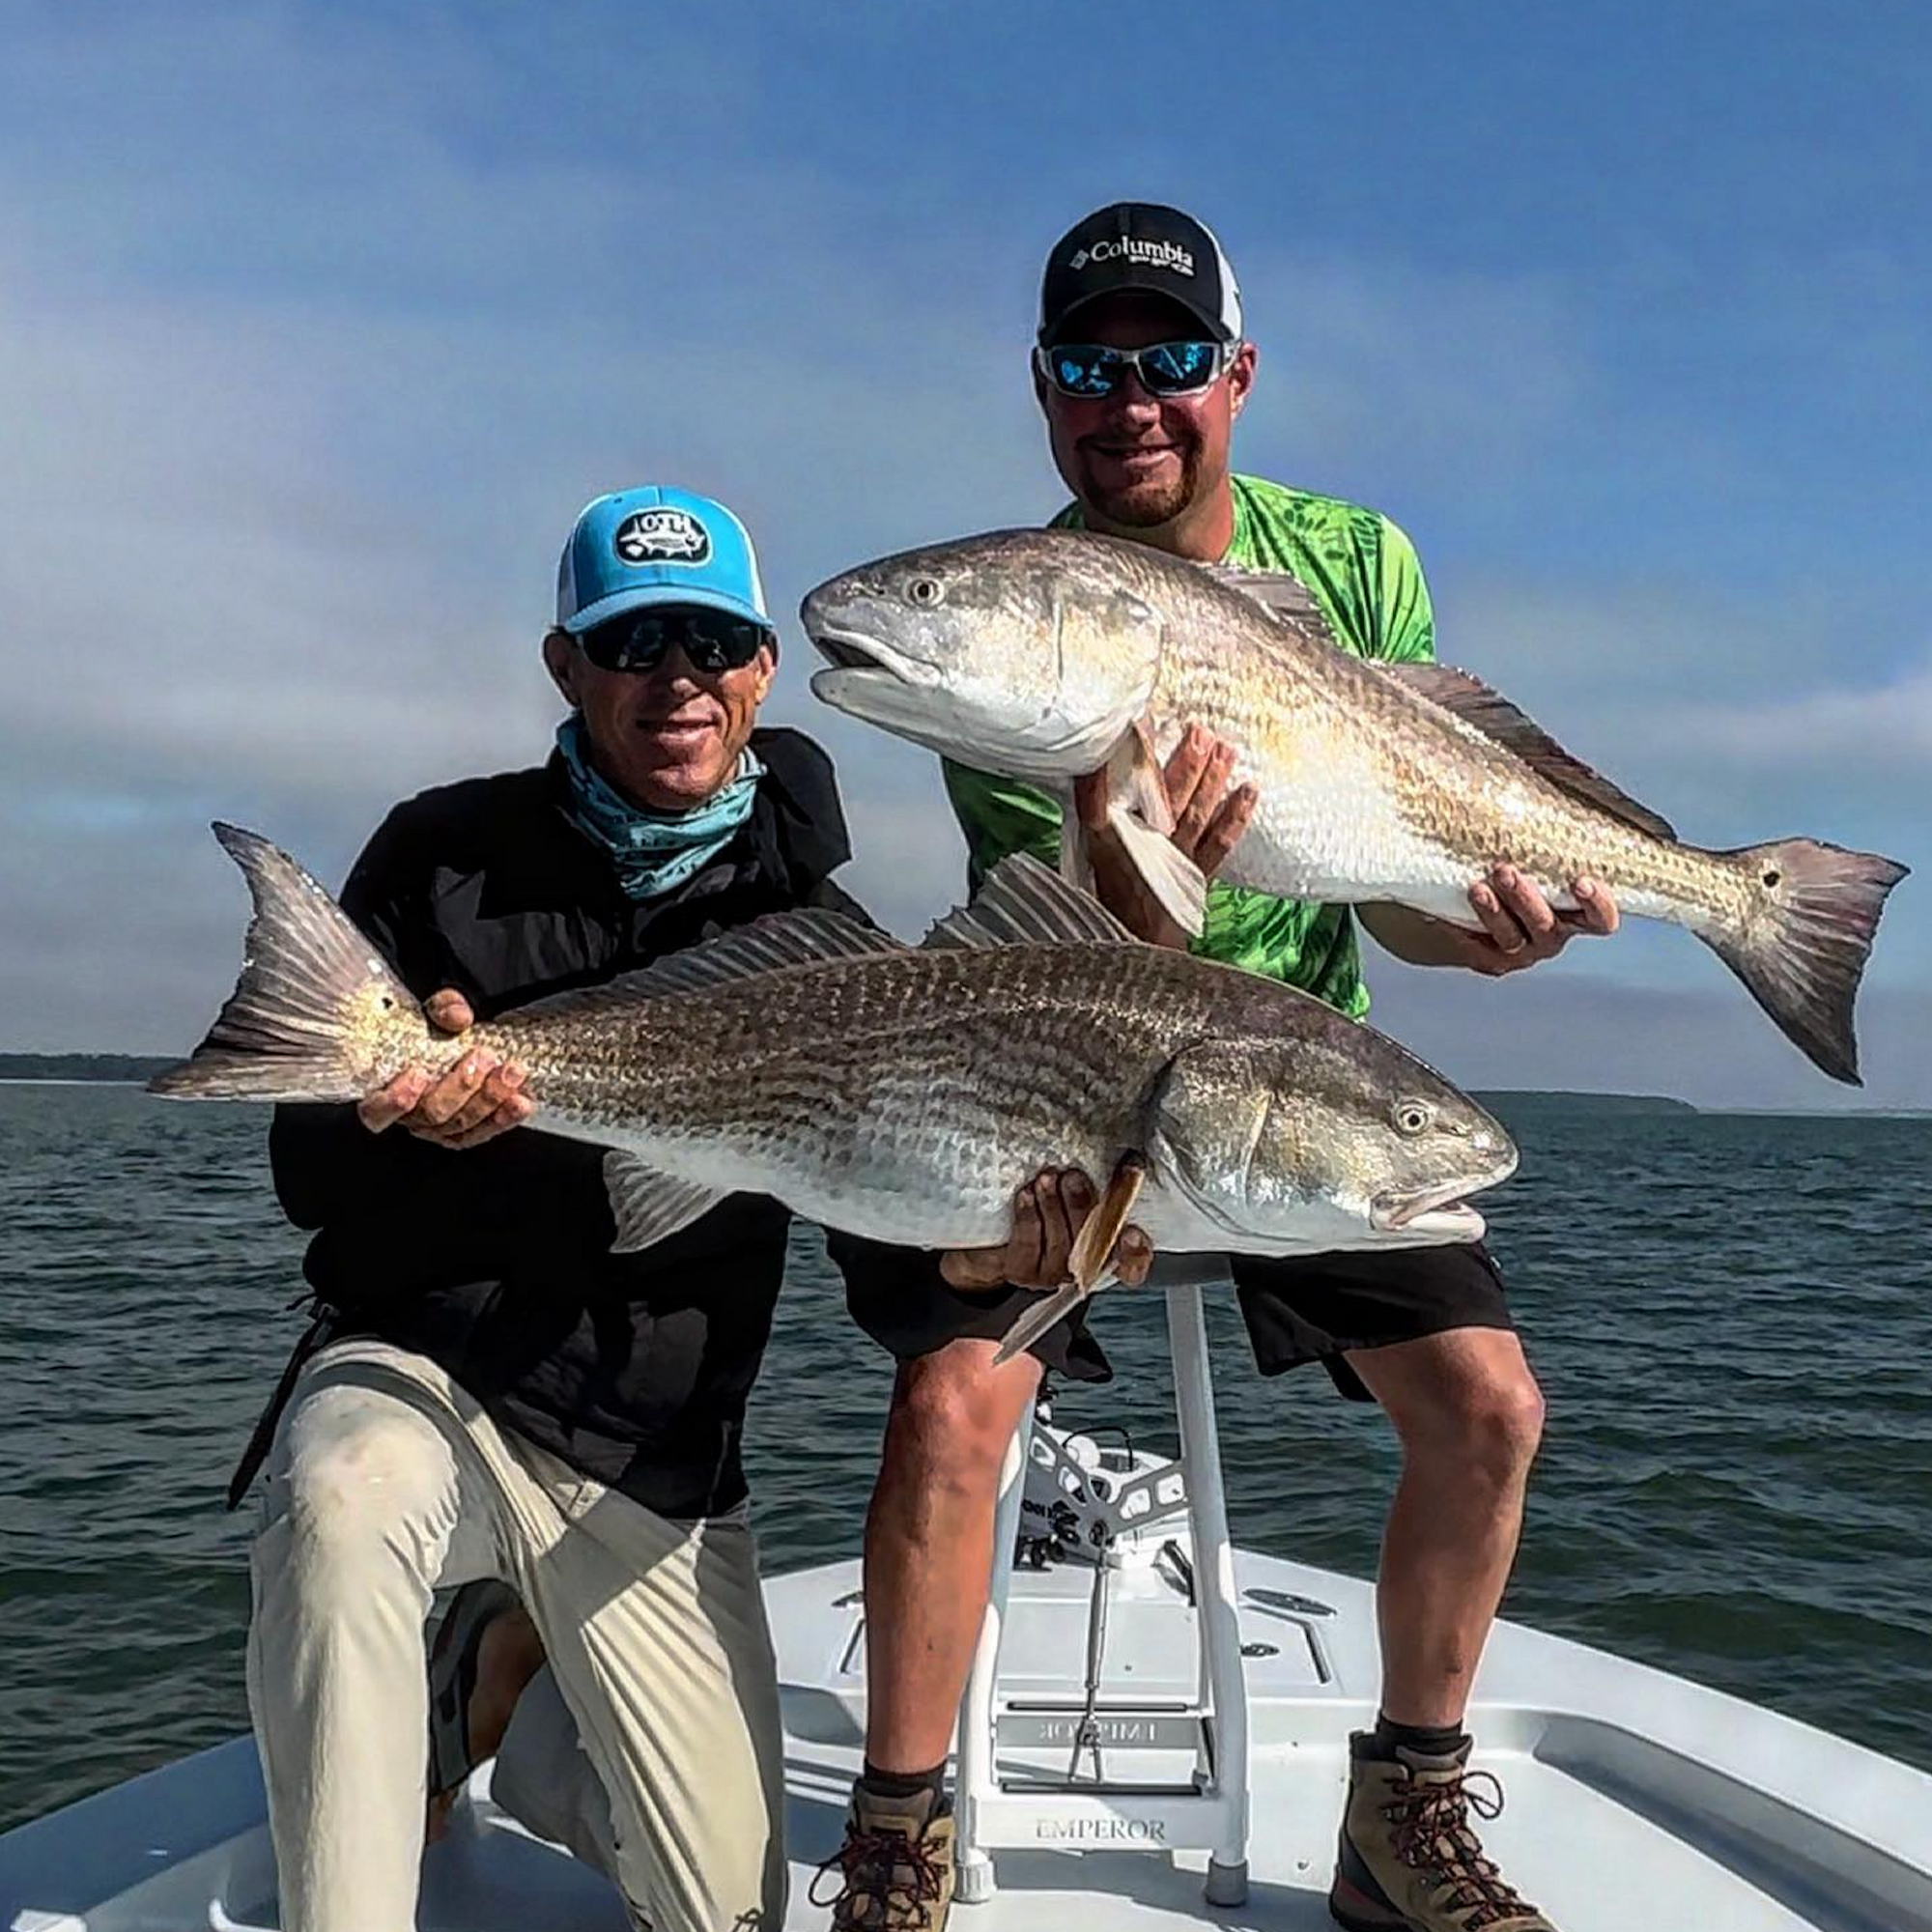 Great bite on the big bull reds this morning!